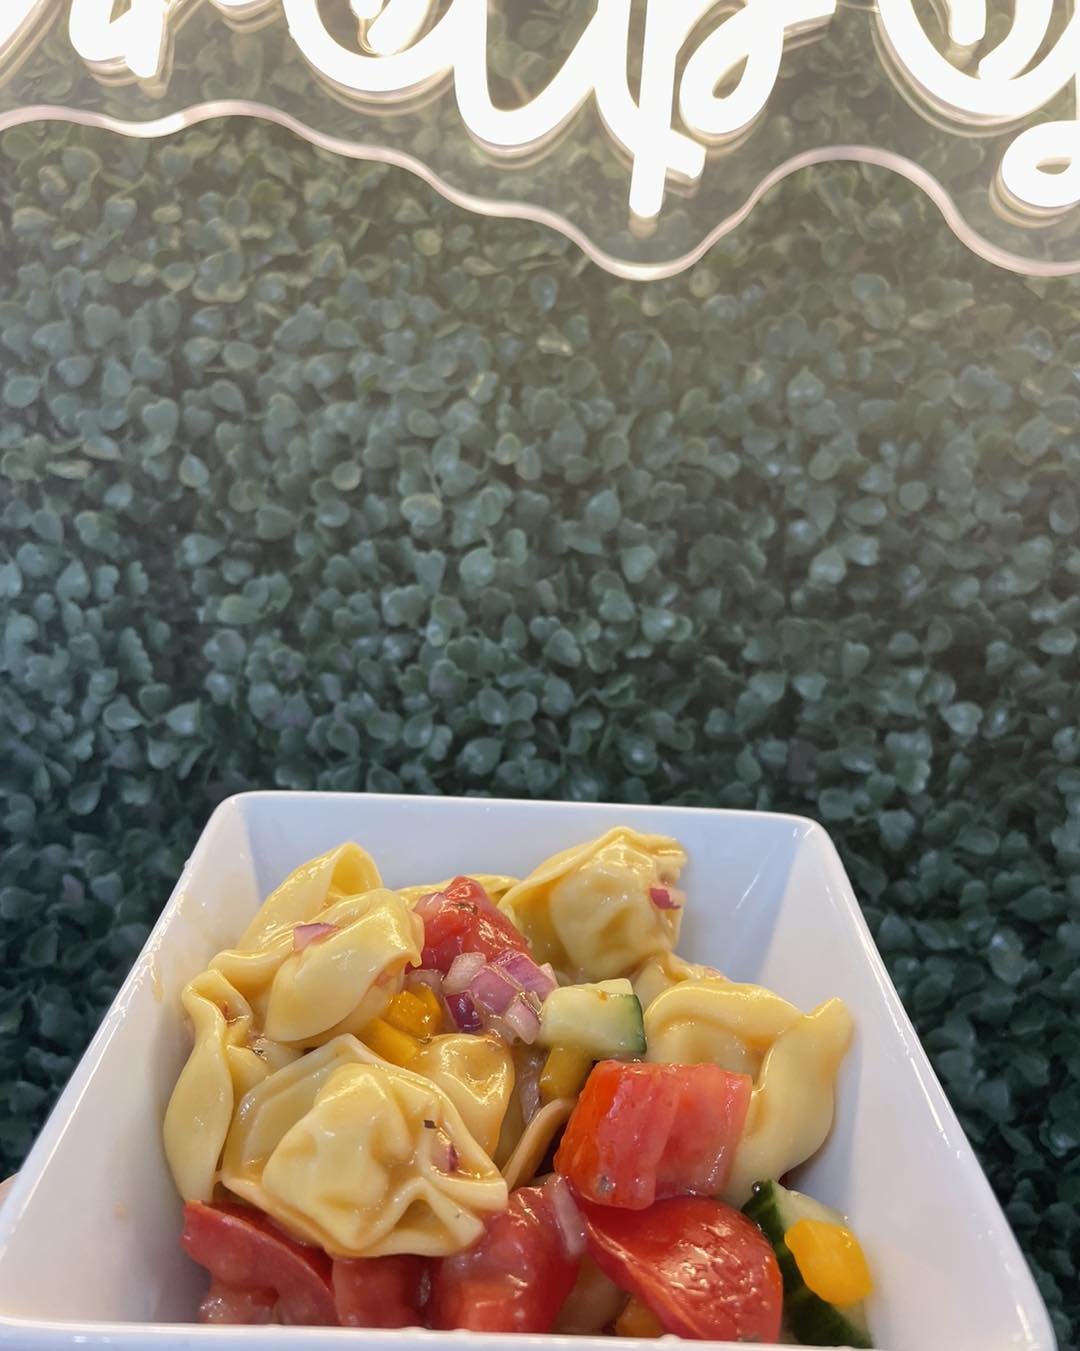 Summer is here and we have Tortellini Pasta Salad and cute Summer cookies! Come in and try today! #summervibes #stiruplove❤️